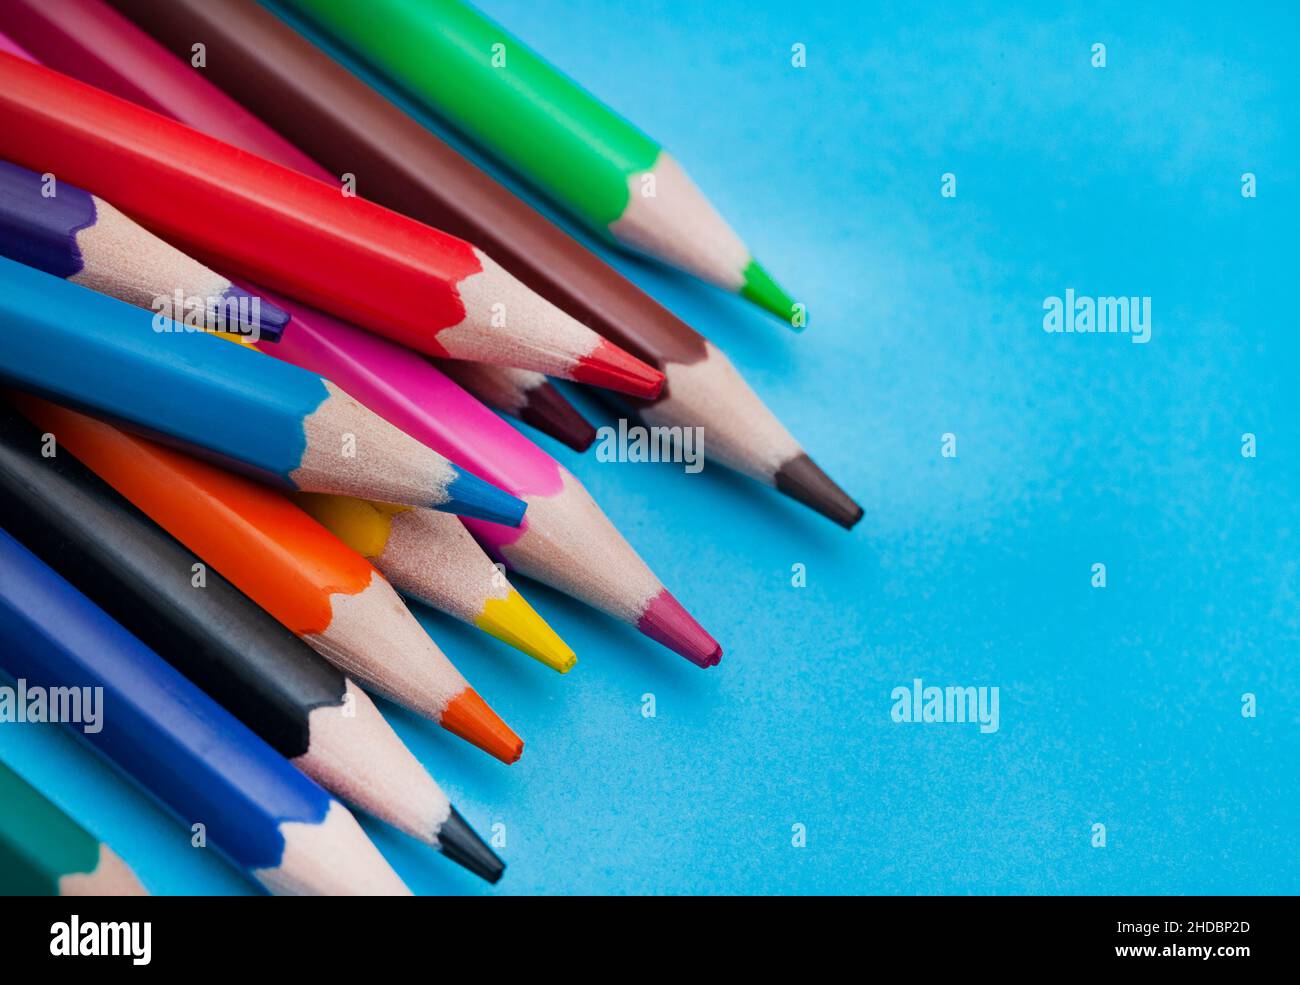 Colored pencils on bright colored background Stock Photo